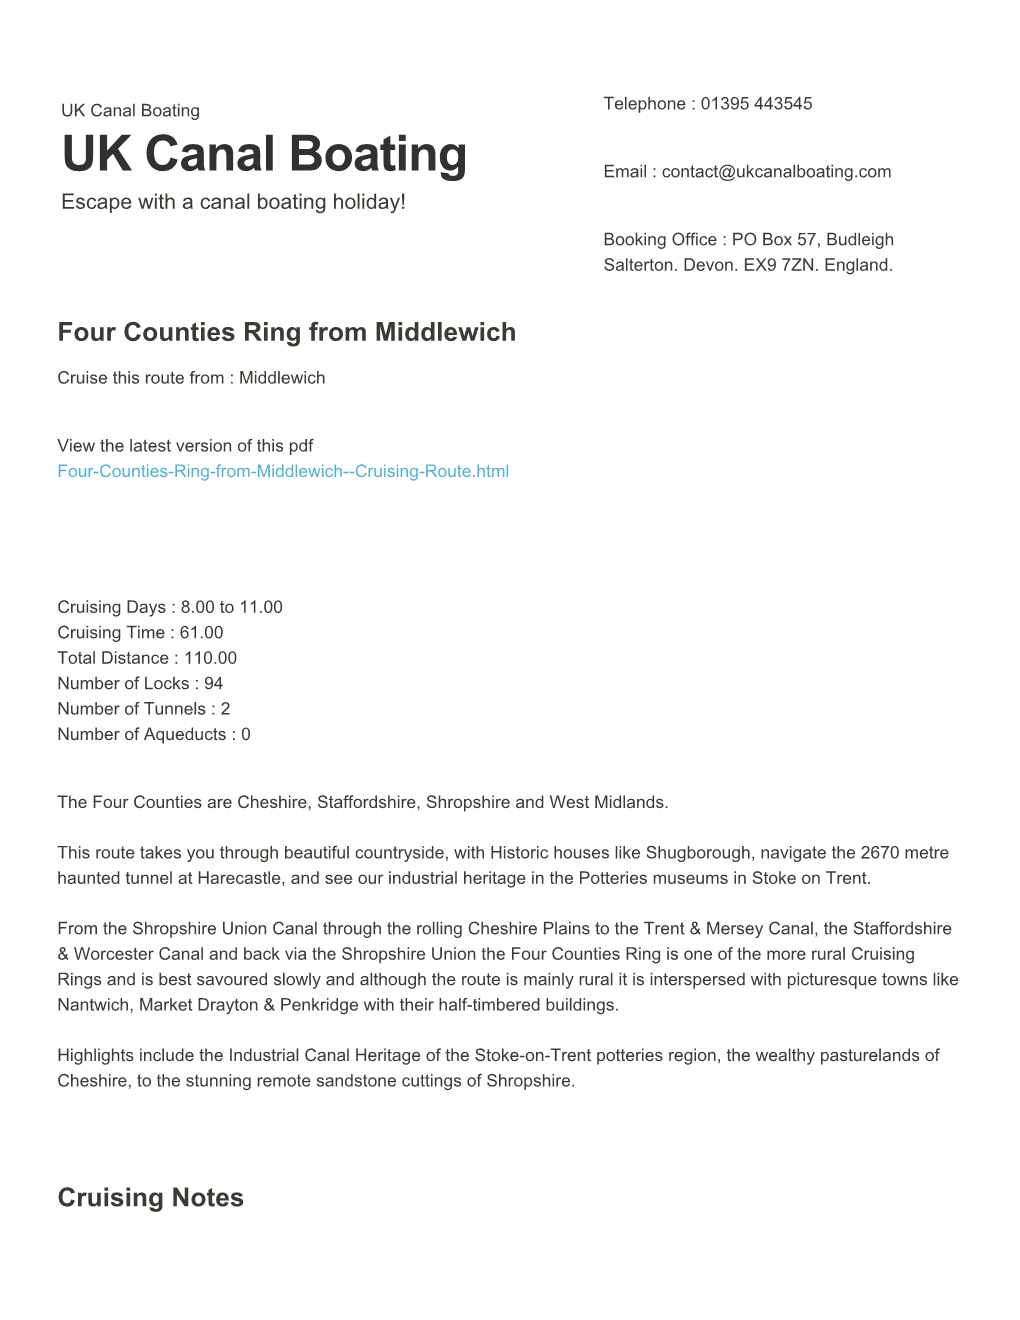 Four Counties Ring from Middlewich | UK Canal Boating